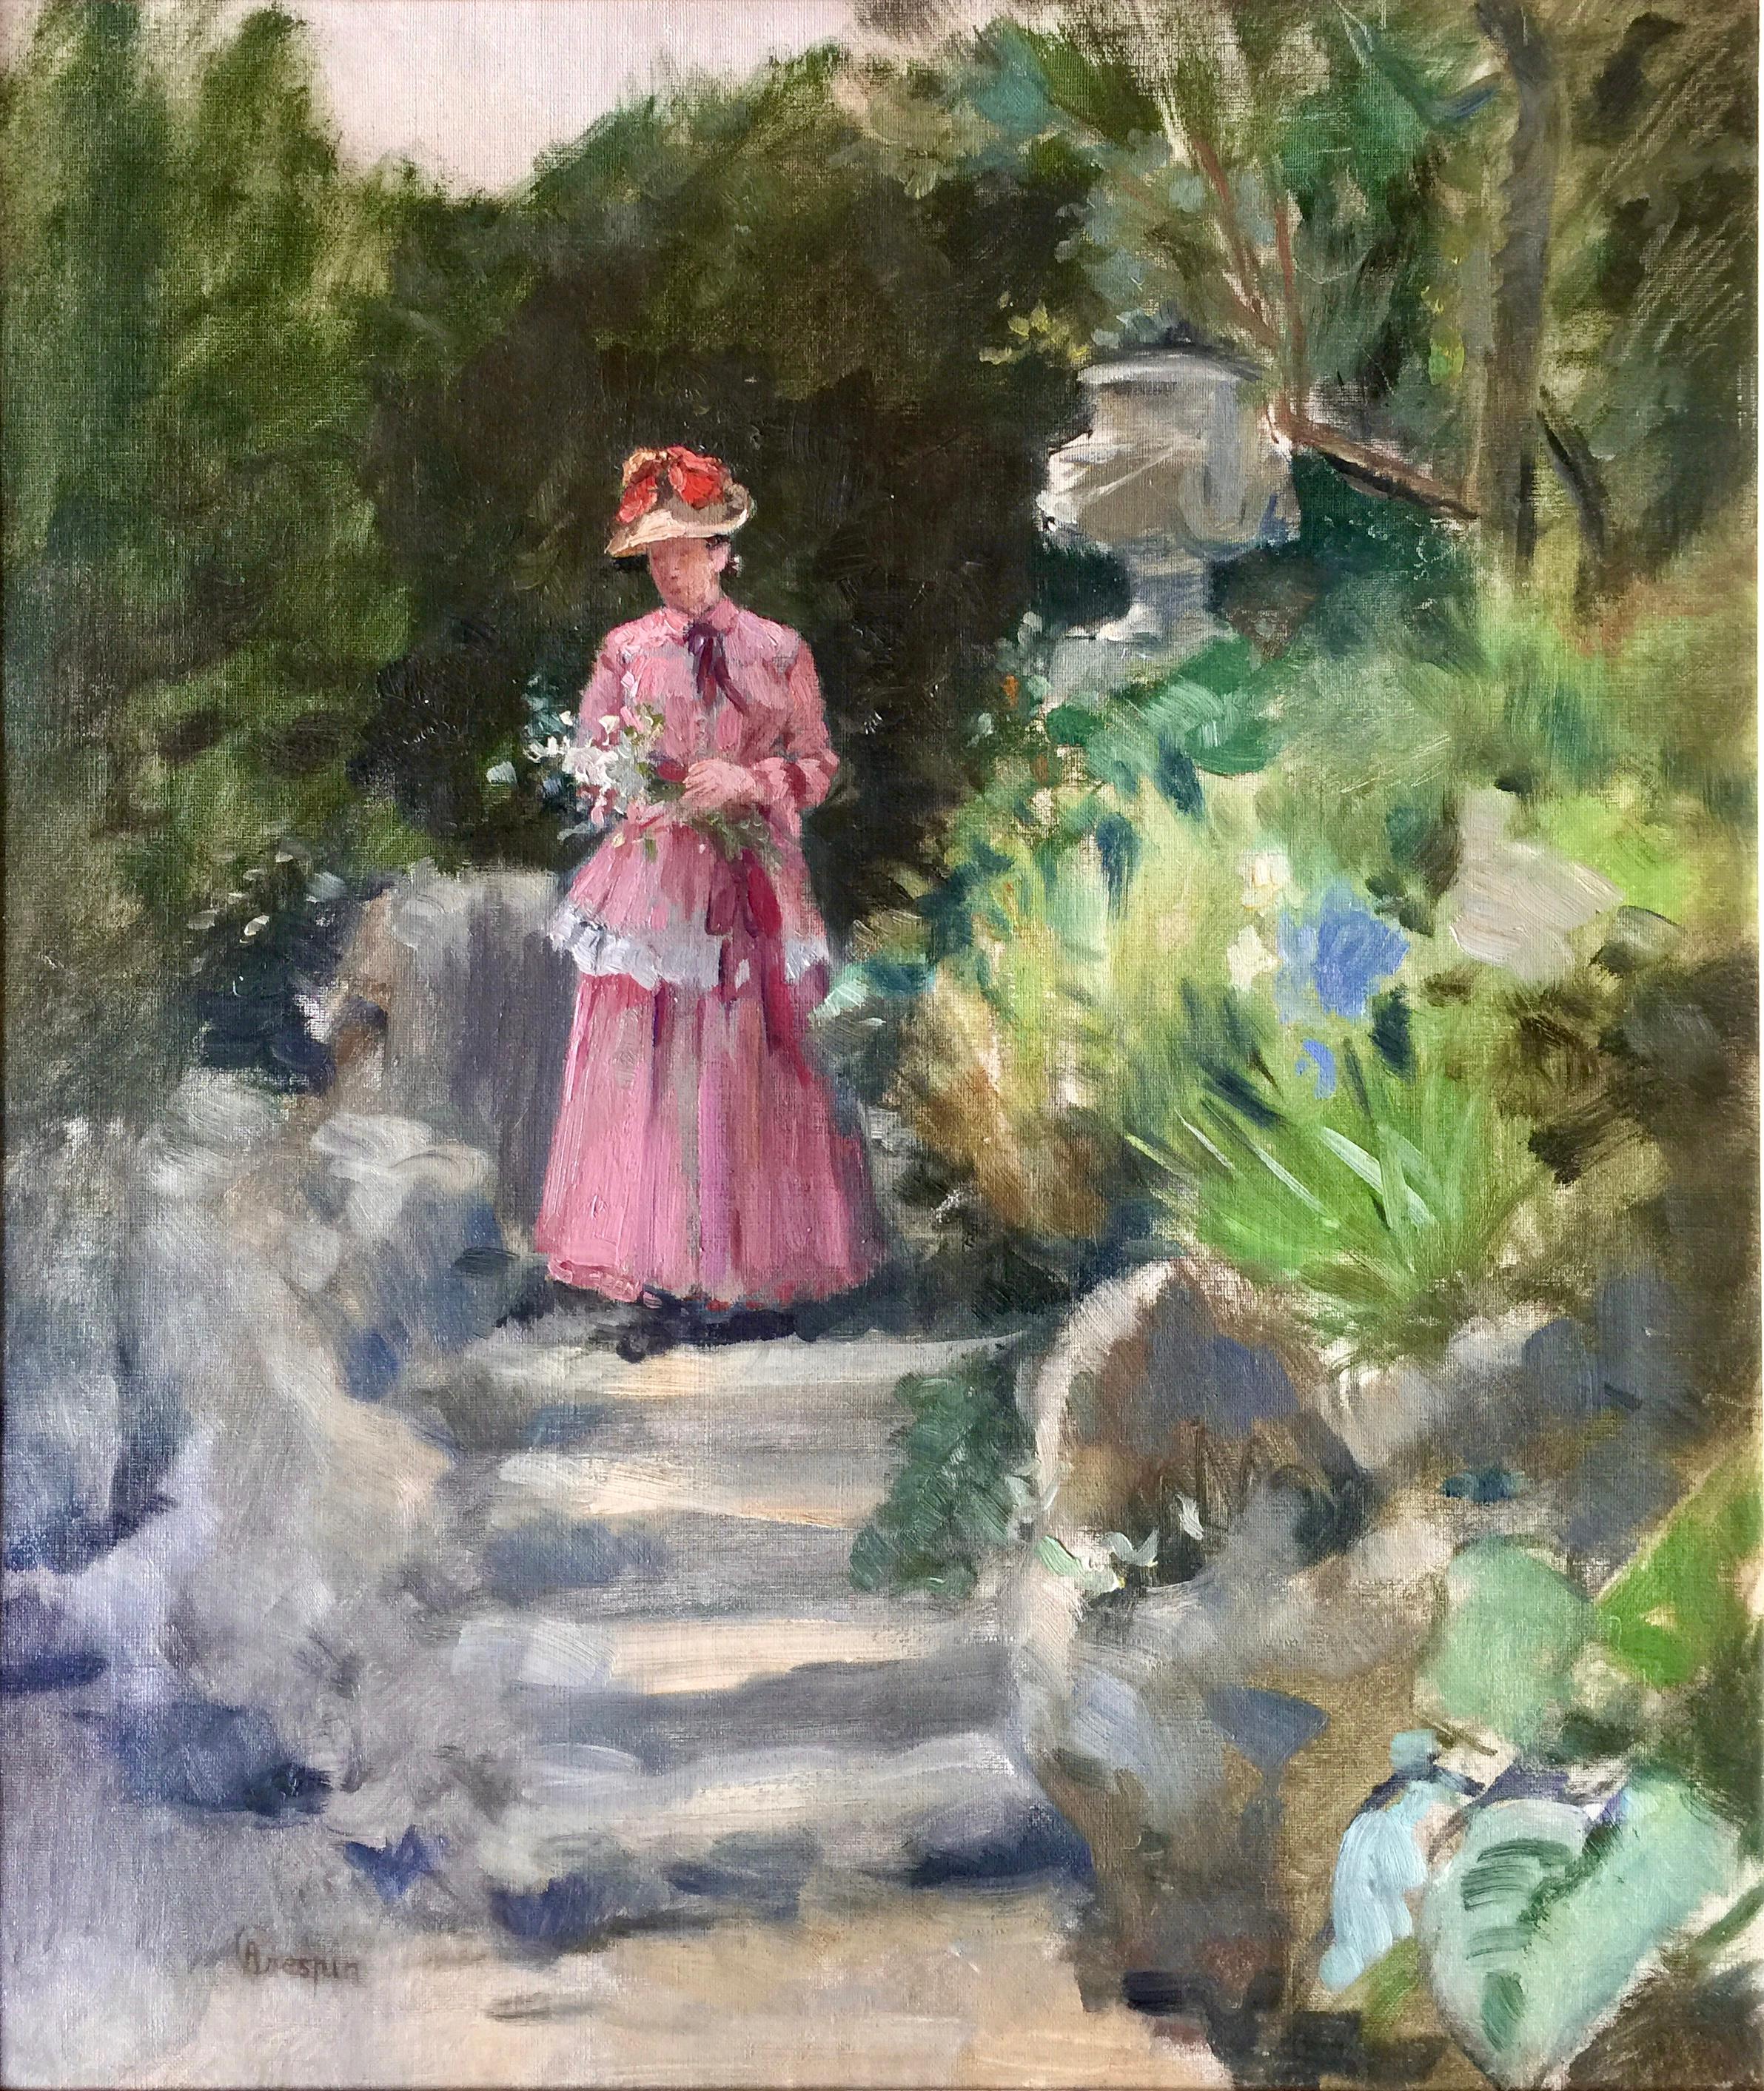 'Lady in the Garden' by Adolphe Crespin, Brussels 1859 – 1944, Belgian Painter - Painting by Crespin Adolphe